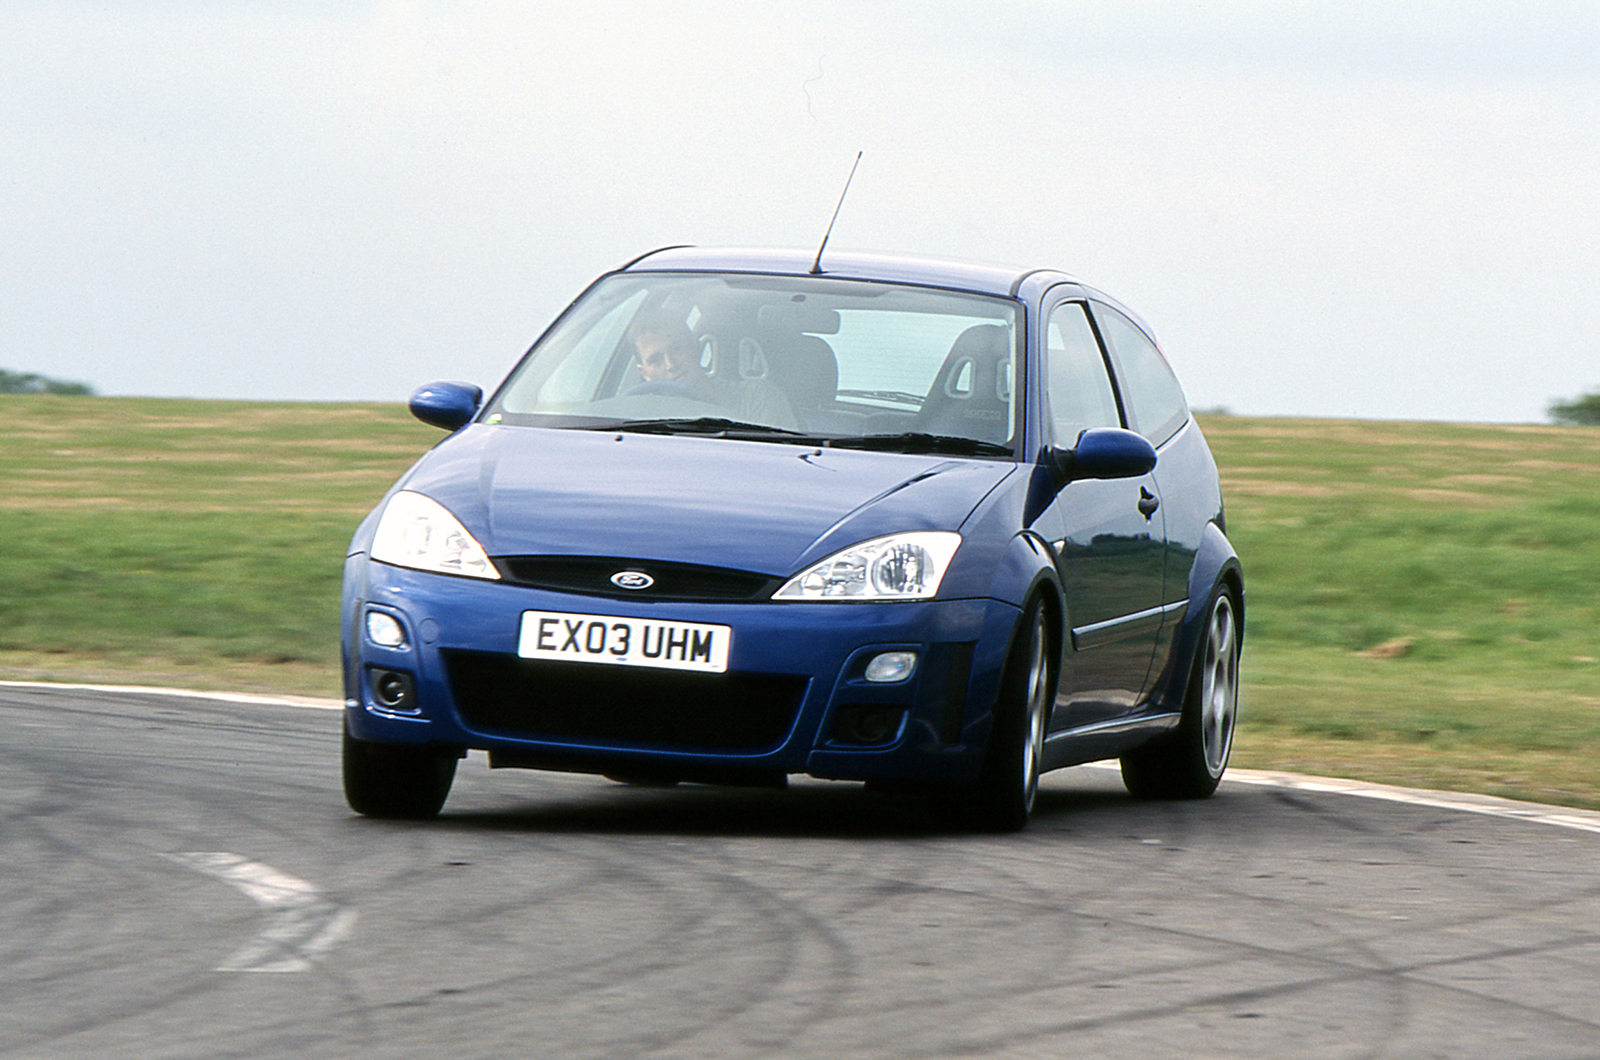 Classic & Sports Car – 60 years of Fast Fords: Blue Oval brilliance